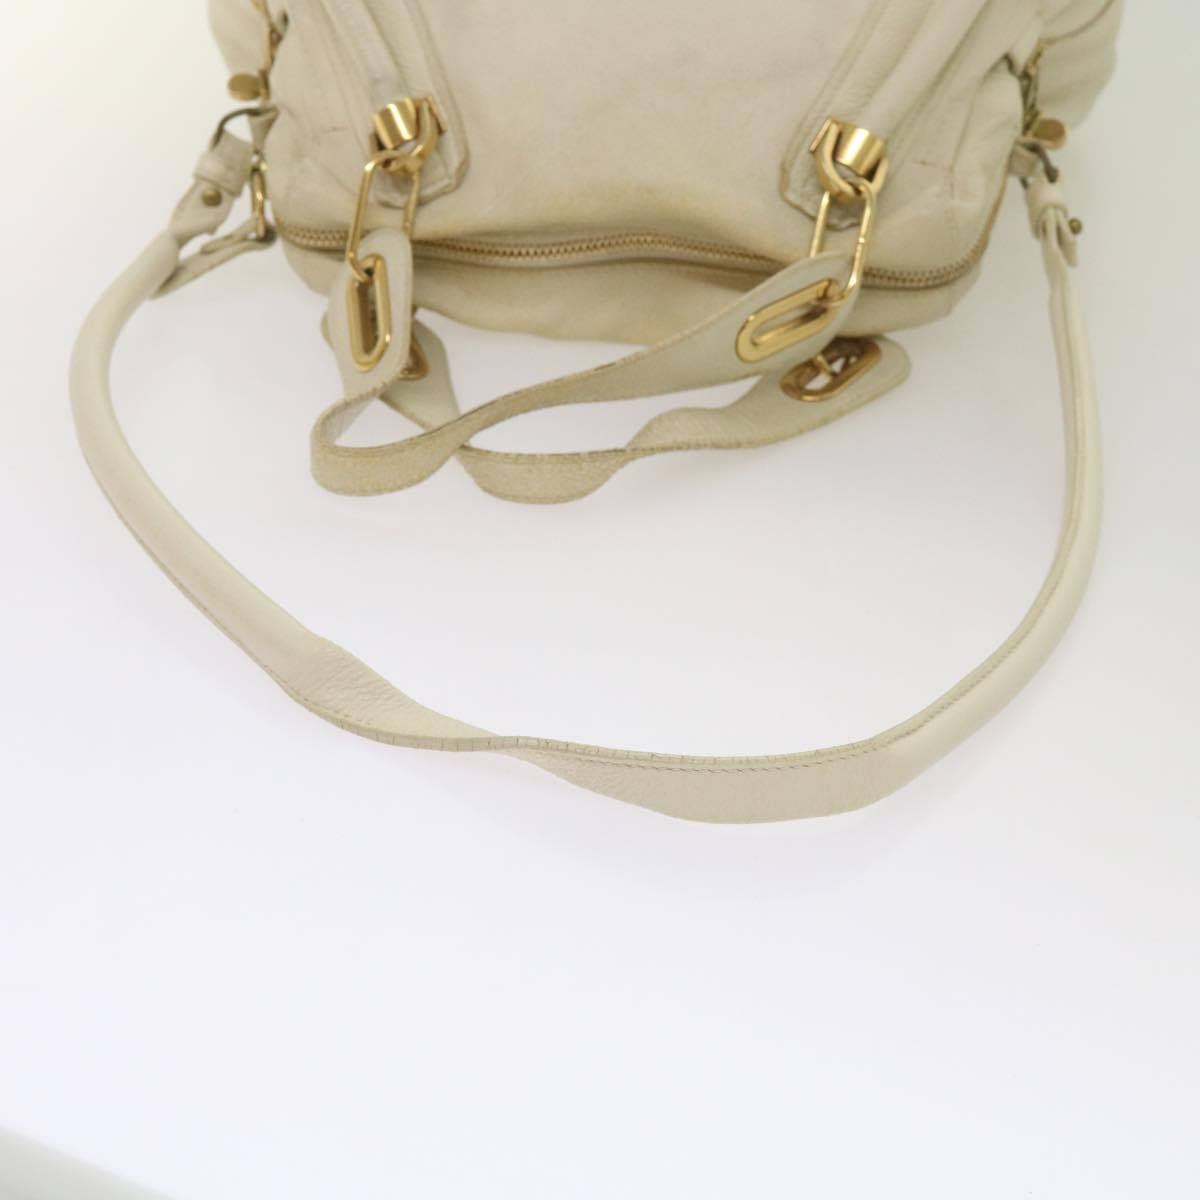 Chloe Mercy Shoulder Bag Leather White Auth 68076